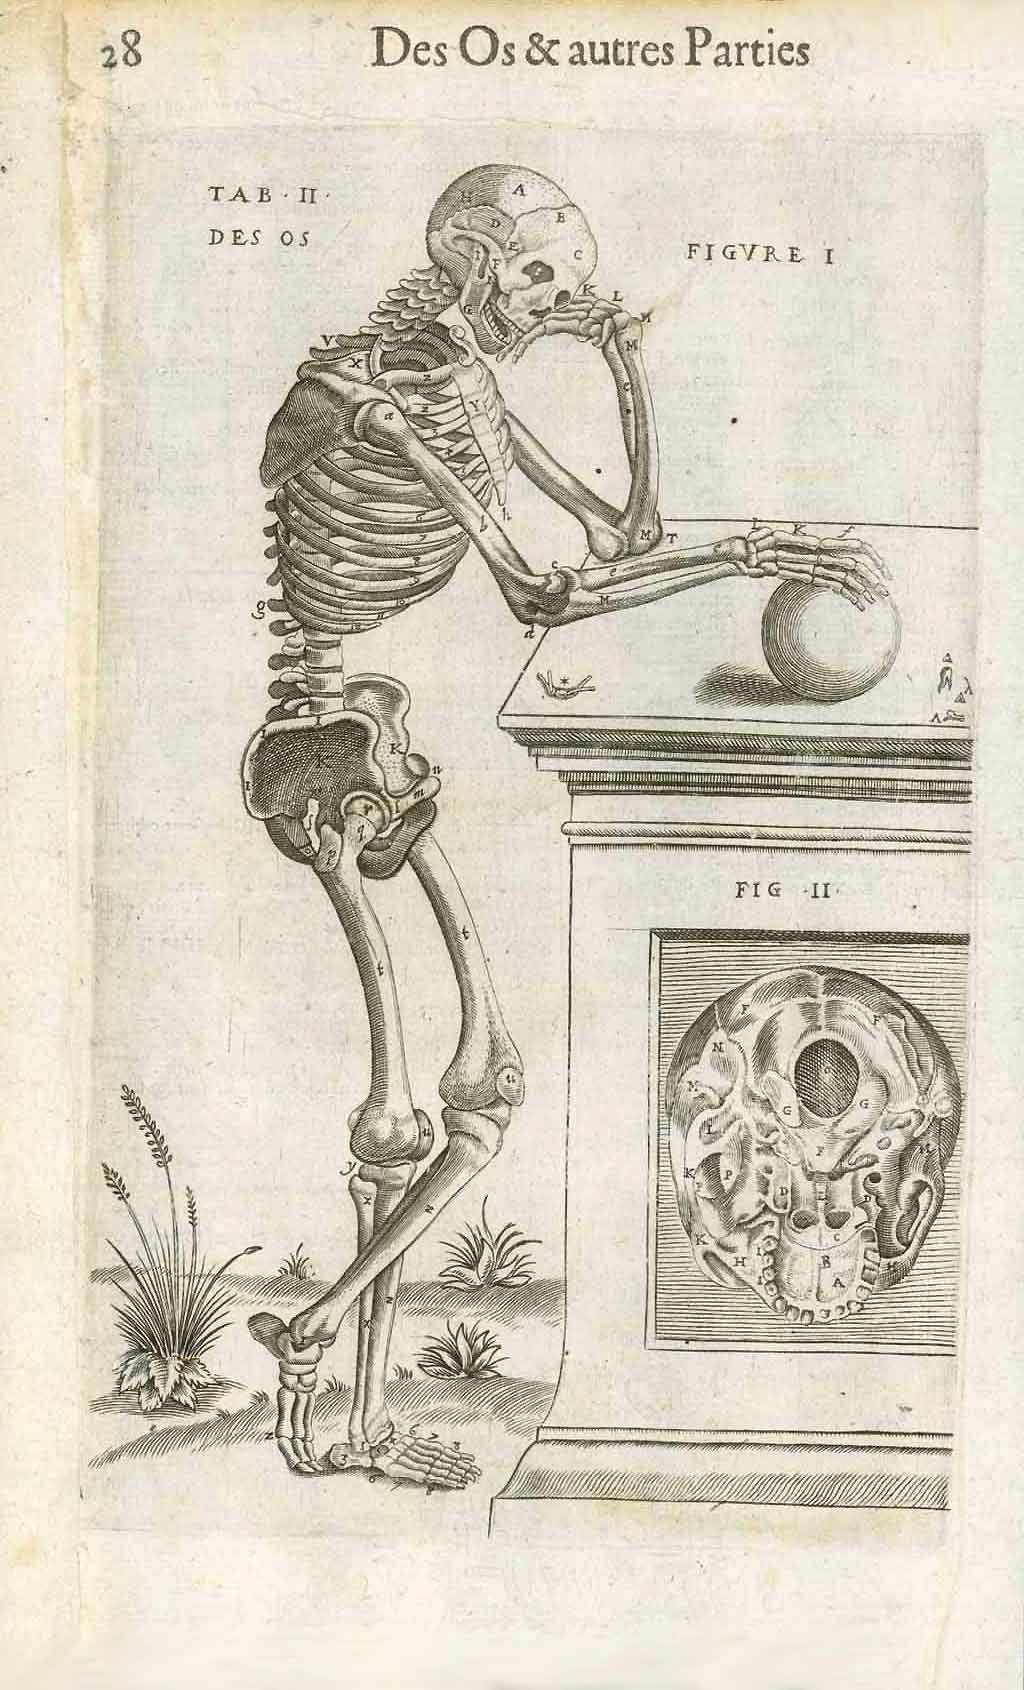 Medicine, Anatomy, Bones, "Des Os & autres Parties"  About Bones and other Parts (of the human body)  Copper engraving by Juan Valverde de Hamusco (Giovanni Valverde de Amusco) from  "La anatomia del corpo Umano", the Italian edition published in Venice in 1580 by Giunta.  Juan Valverde de Hamusco (also Amusco) (c.1525-c.1588) was a a Spanish anatomist.  French edition.